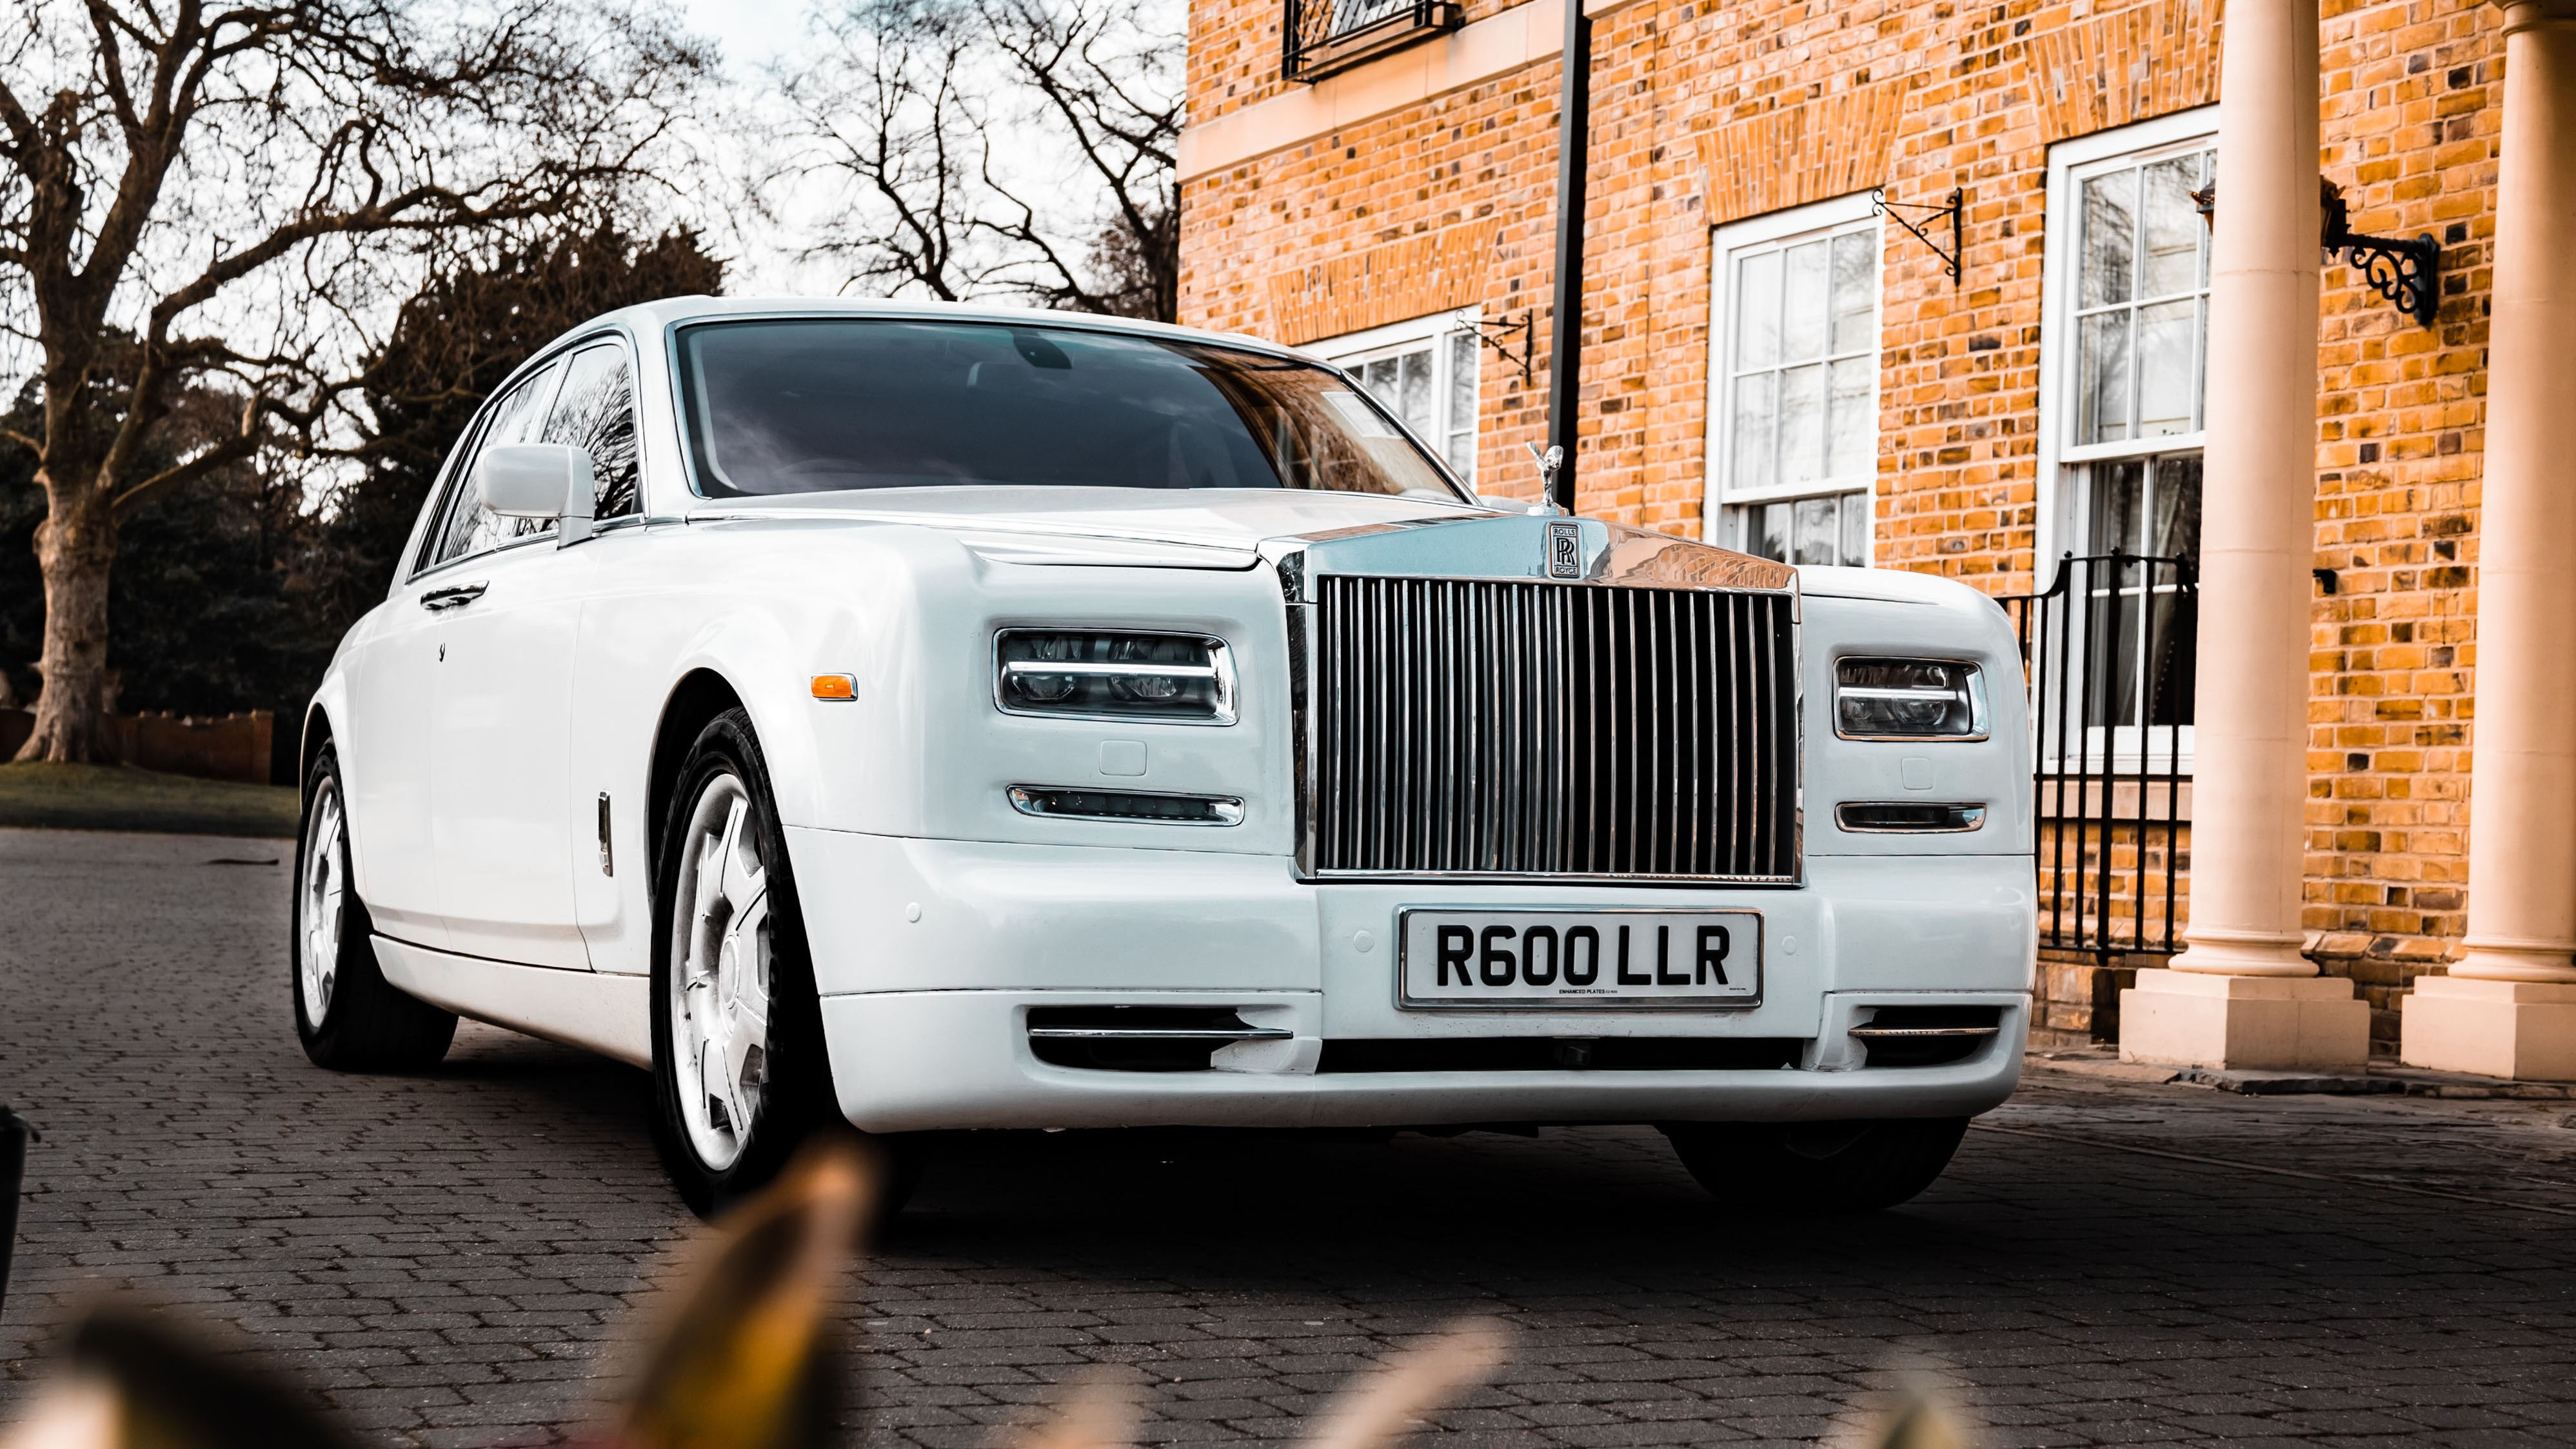 White Rolls-Royce Phantom in front of wedding venue. Front view showing a large Chrome grill and spirit of ecstasy mascot on top.